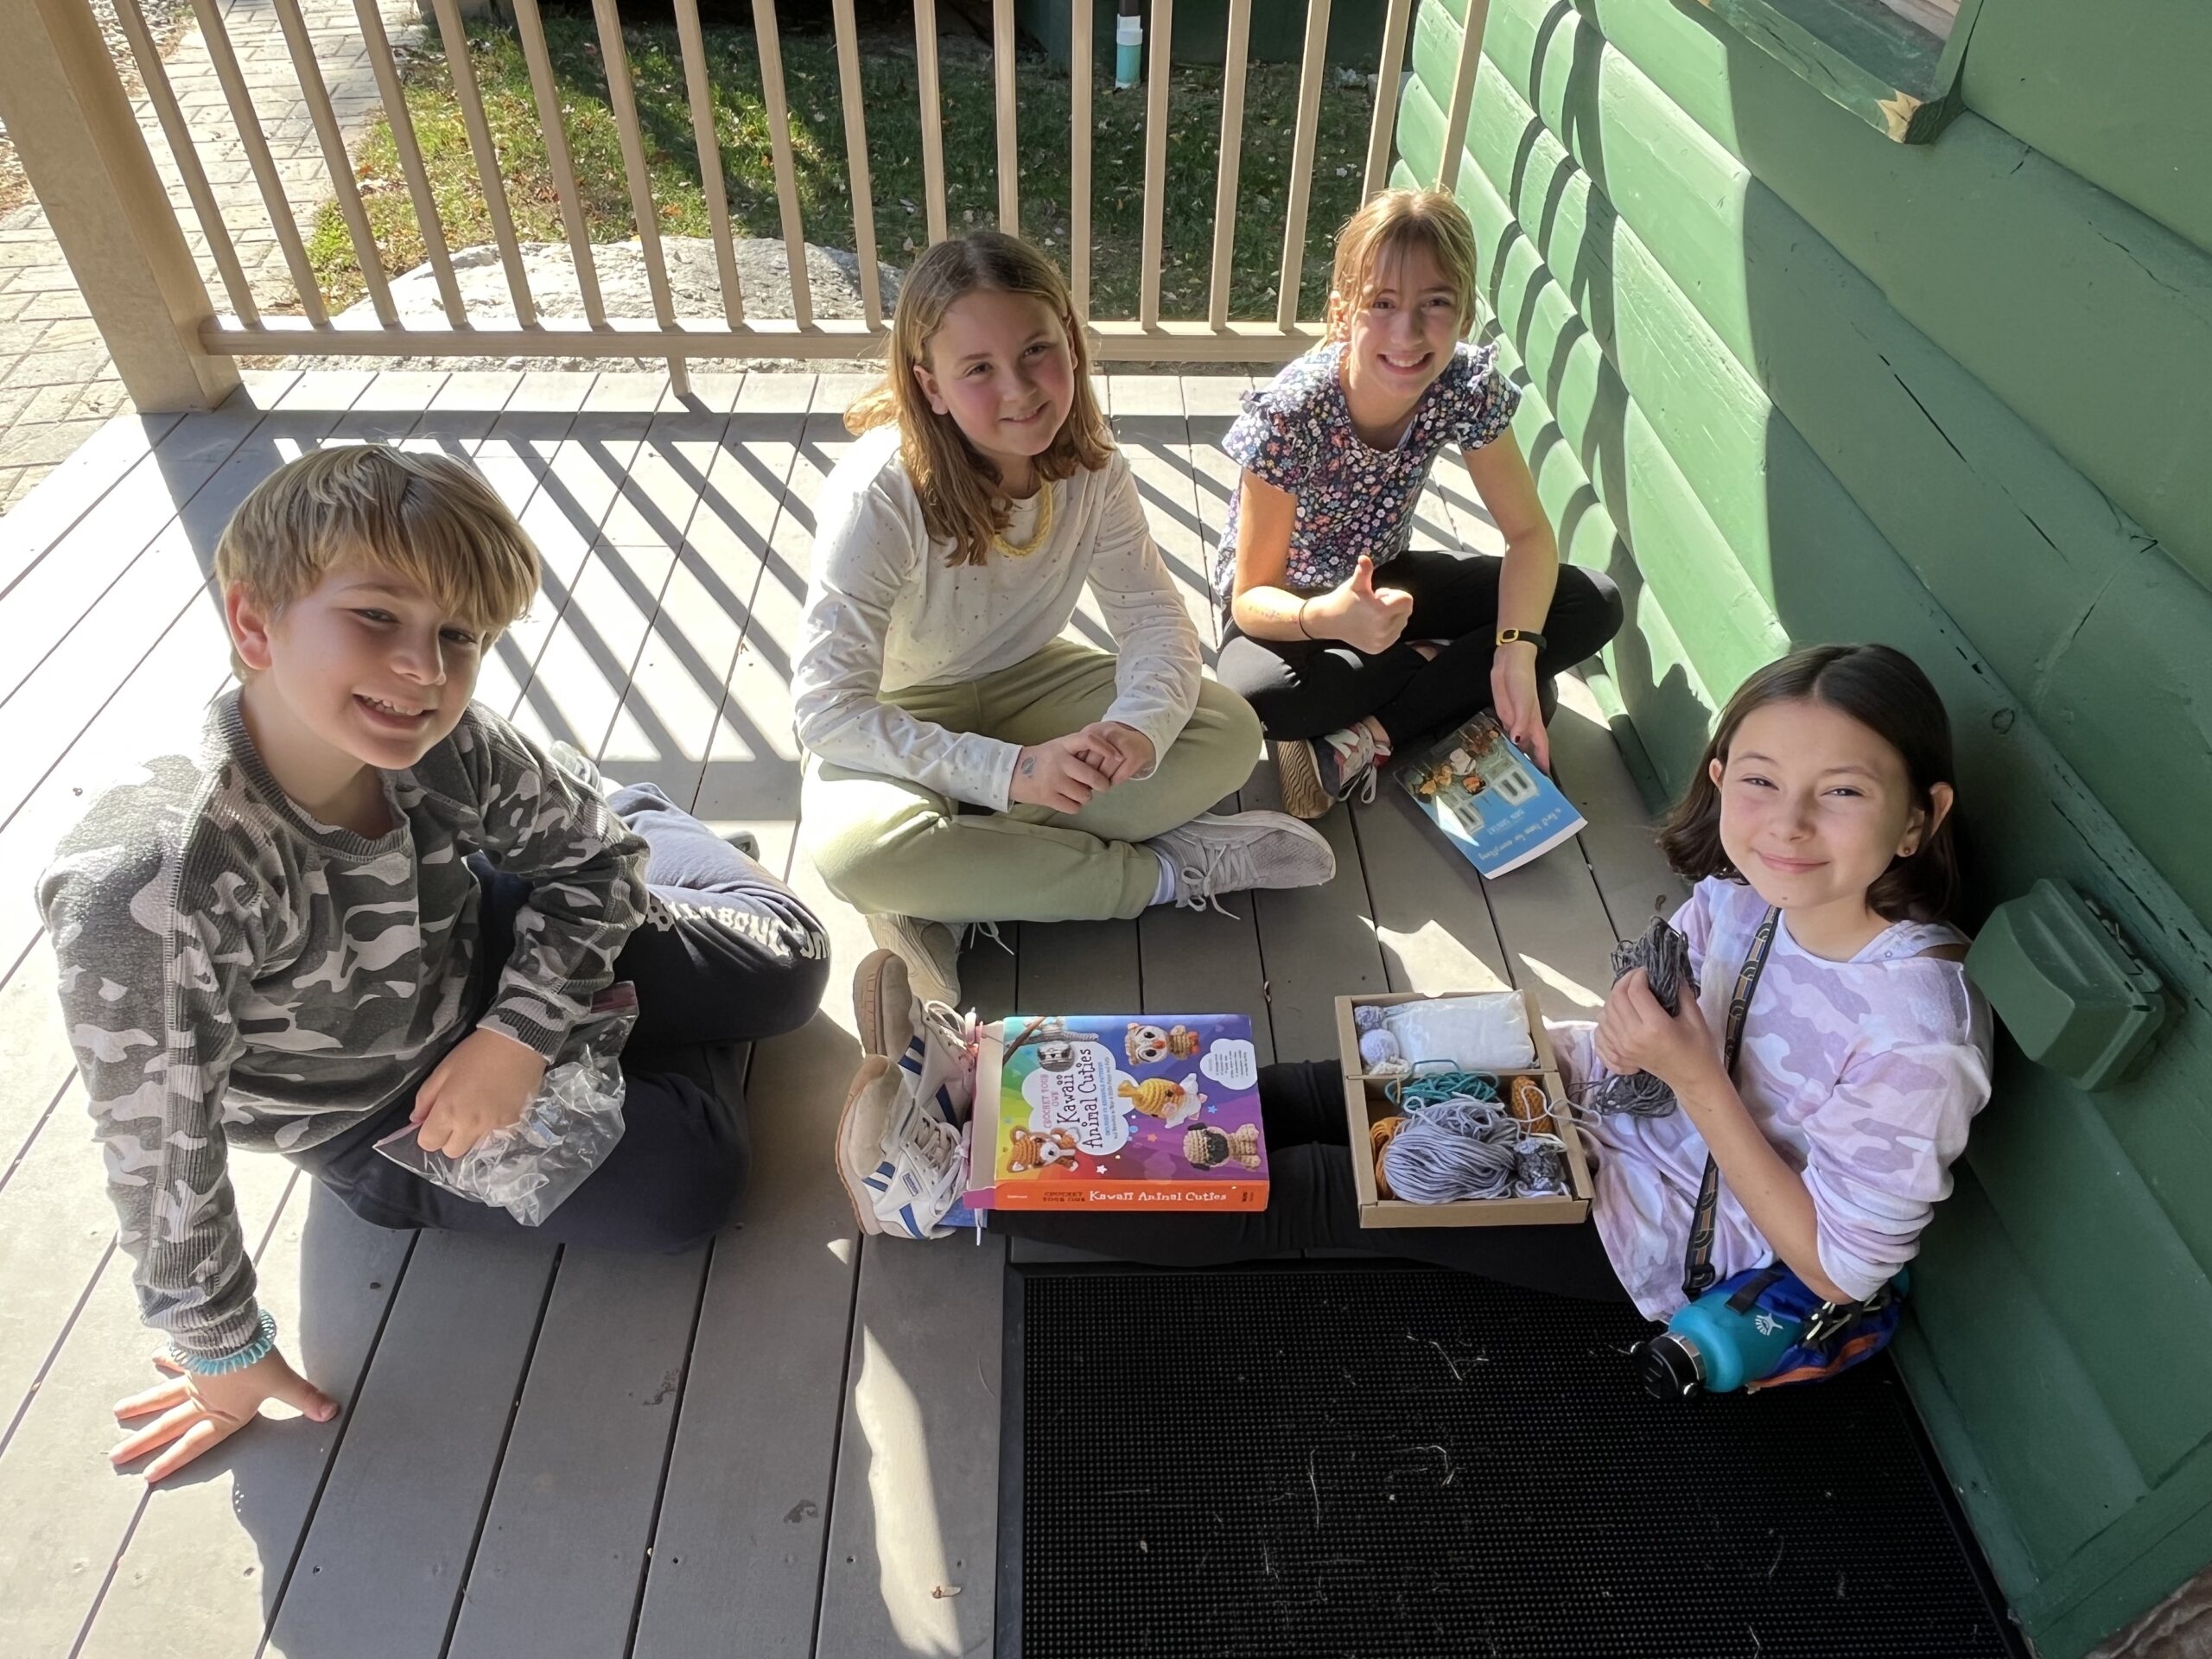 Fieldston Lower students play game together outside of cabin at Nature's Clasroom.